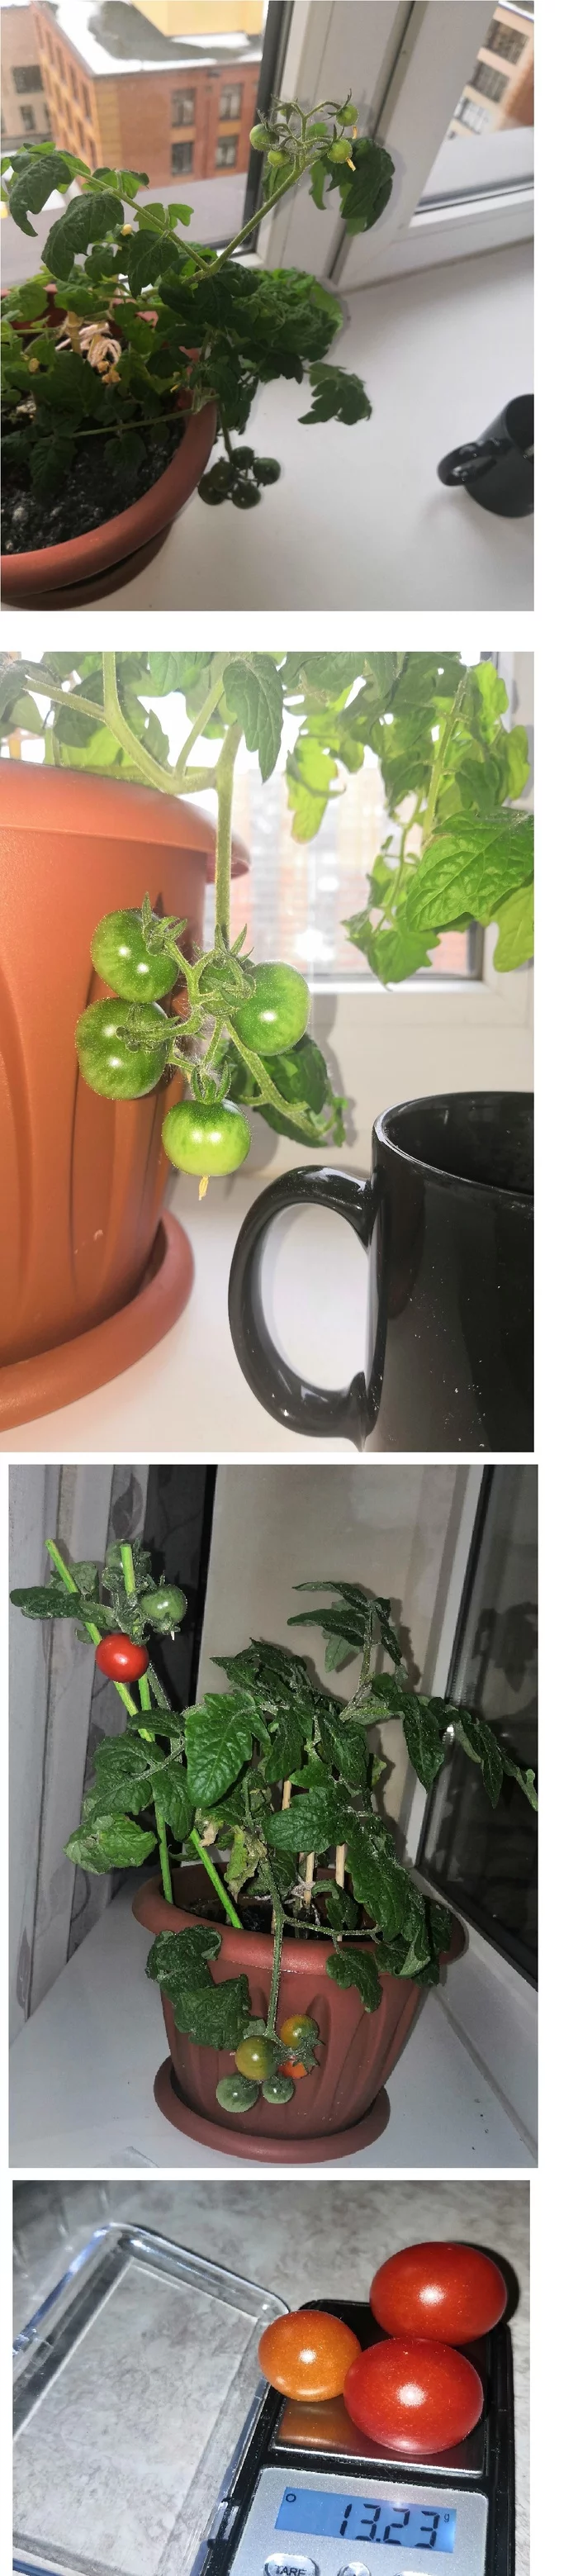 My hydroponics. - Longpost, Plant growing, Tomatoes, Vegetable garden on the windowsill, Vegetables, With your own hands, Progressive crop production, Hydroponics, My